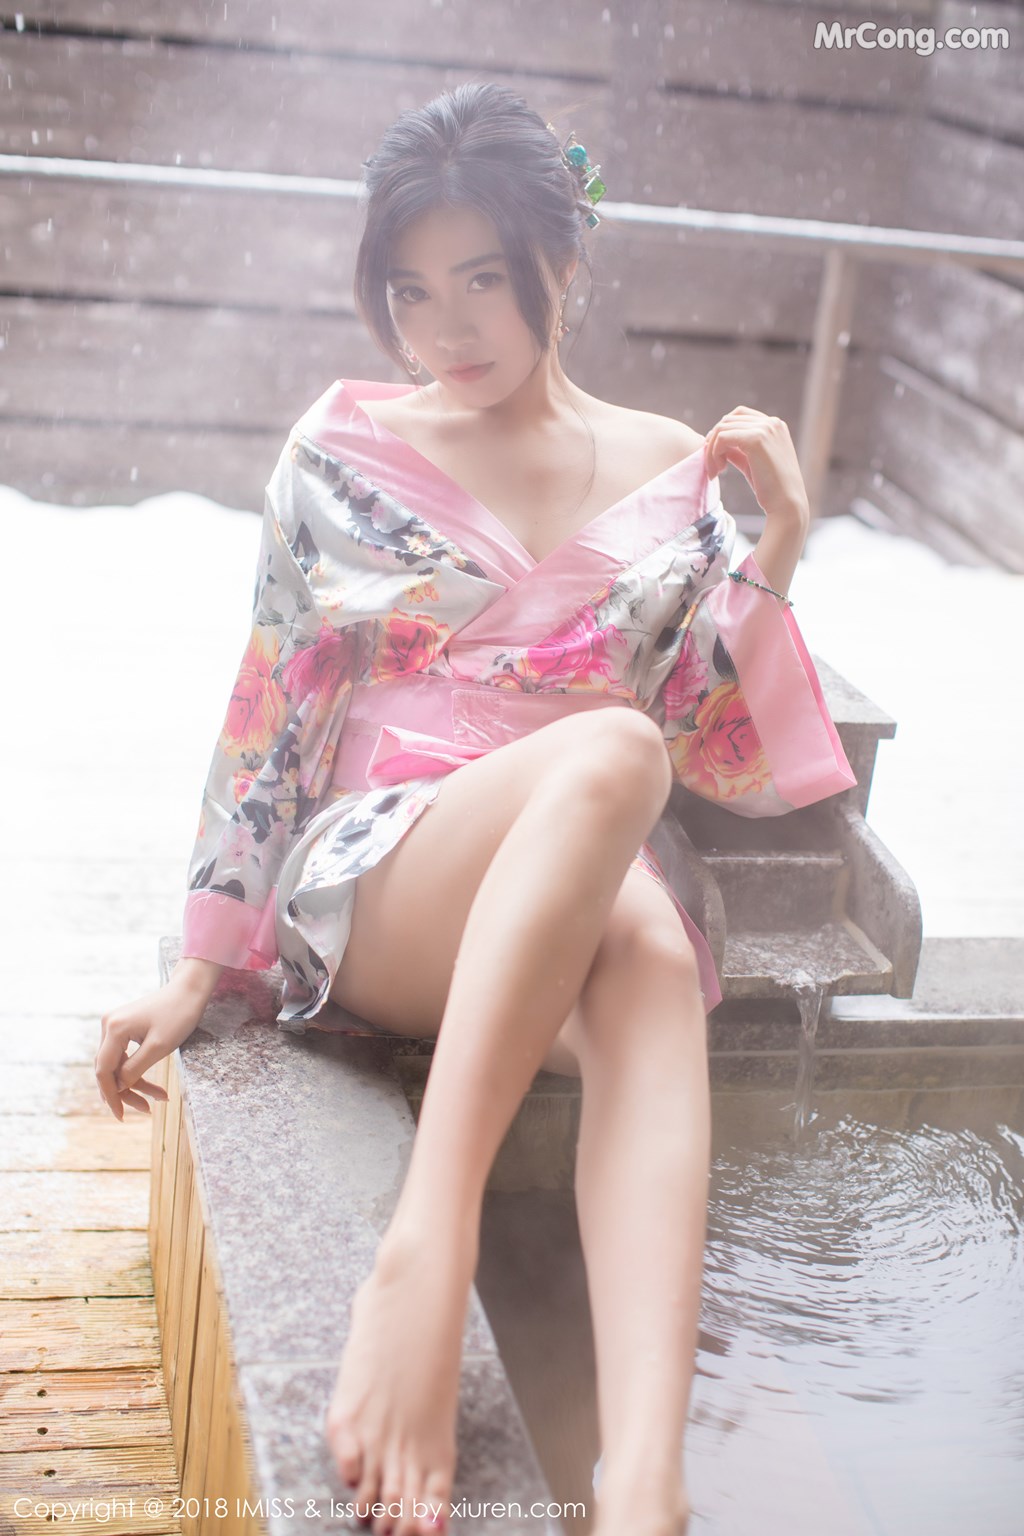 IMISS Vol. 2121: Model Sabrina (许诺) (51 pictures) photo 1-3